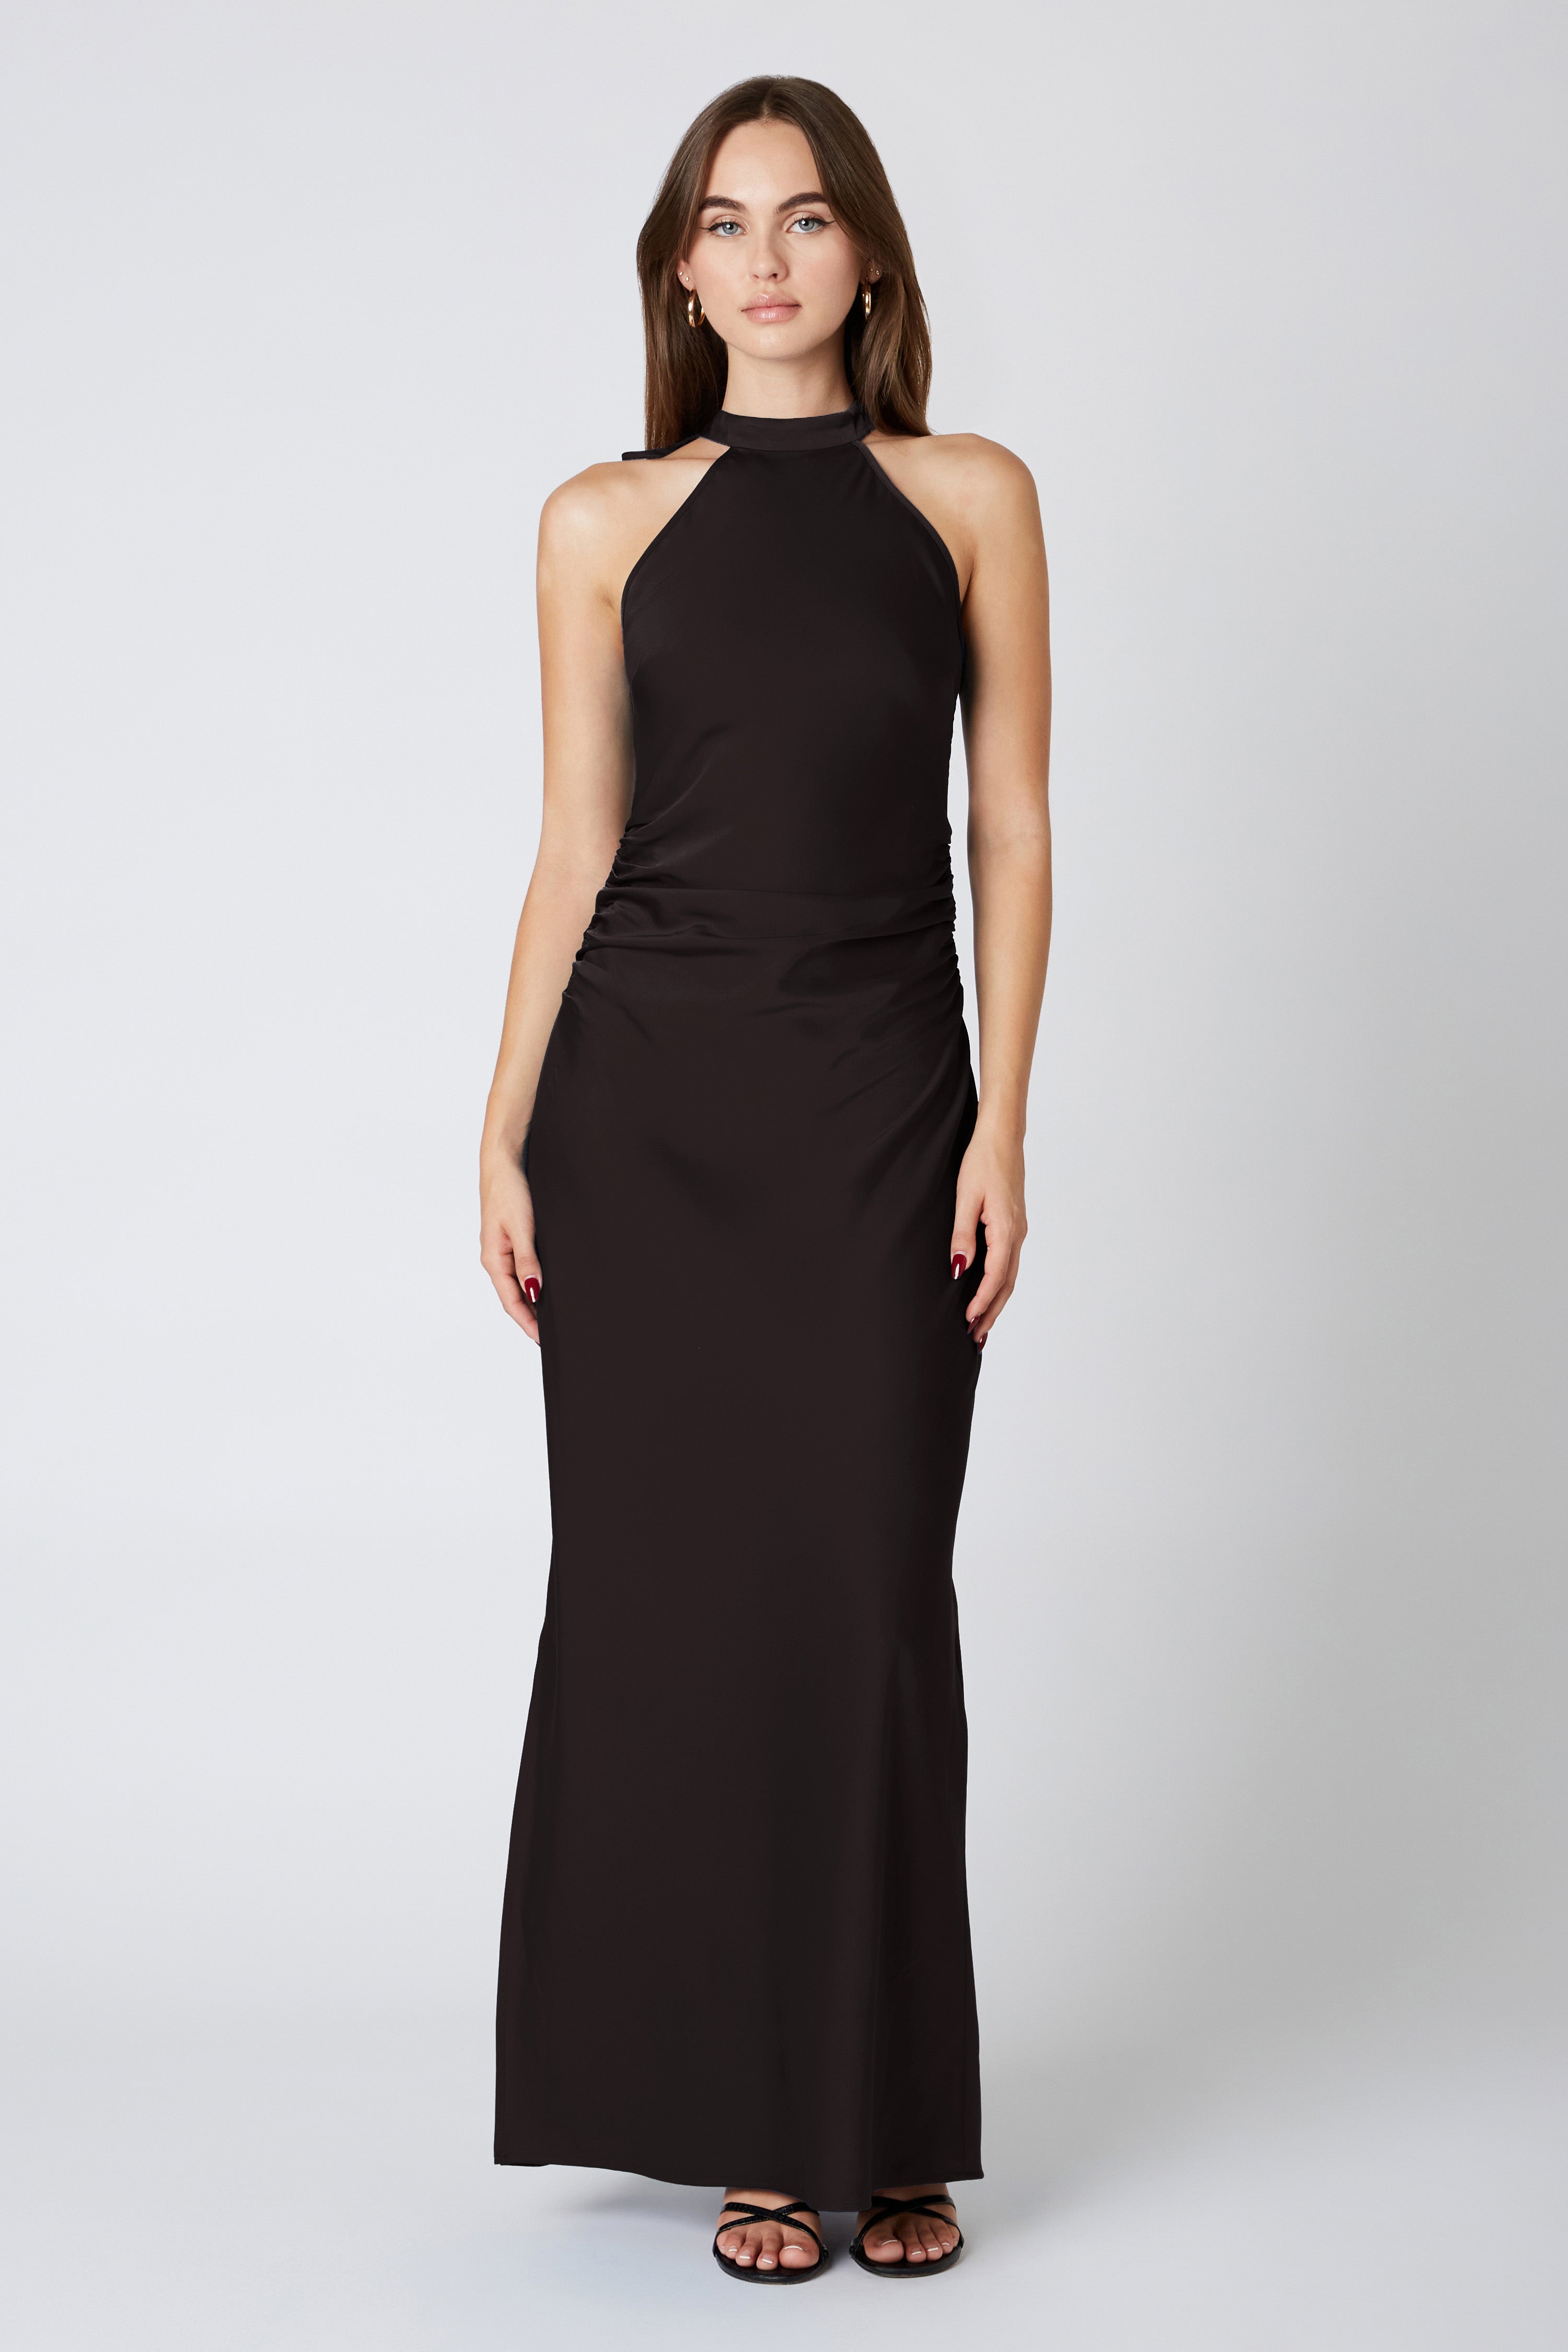 Runway Butterfly Maxi Dress in Black Front View